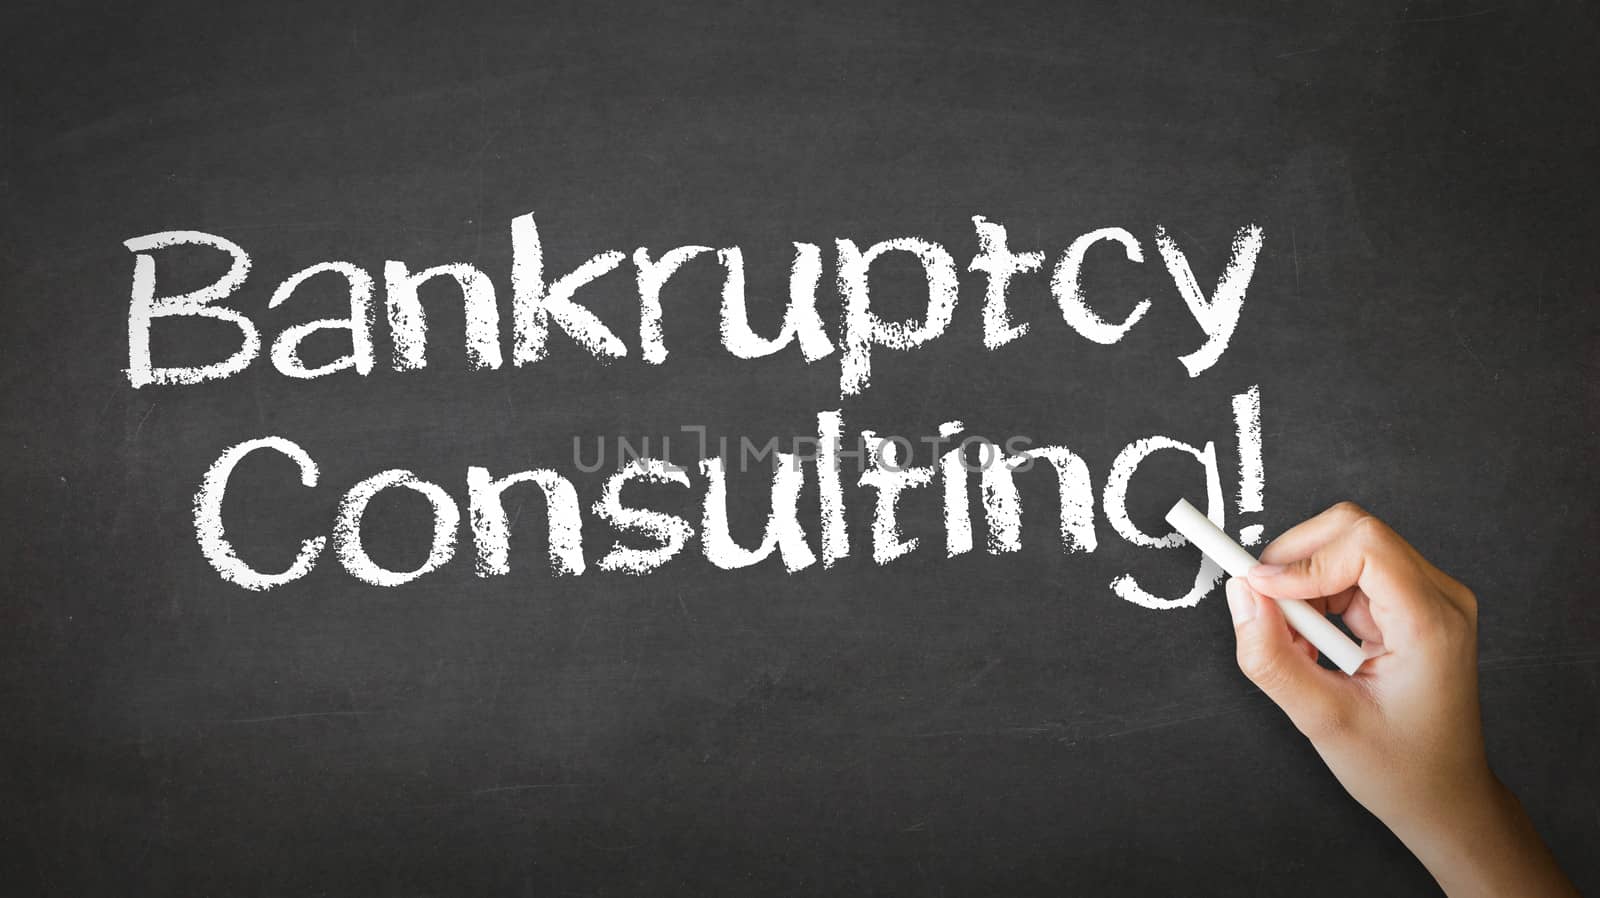 Bankruptcy Consulting Chalk Illustration by kbuntu